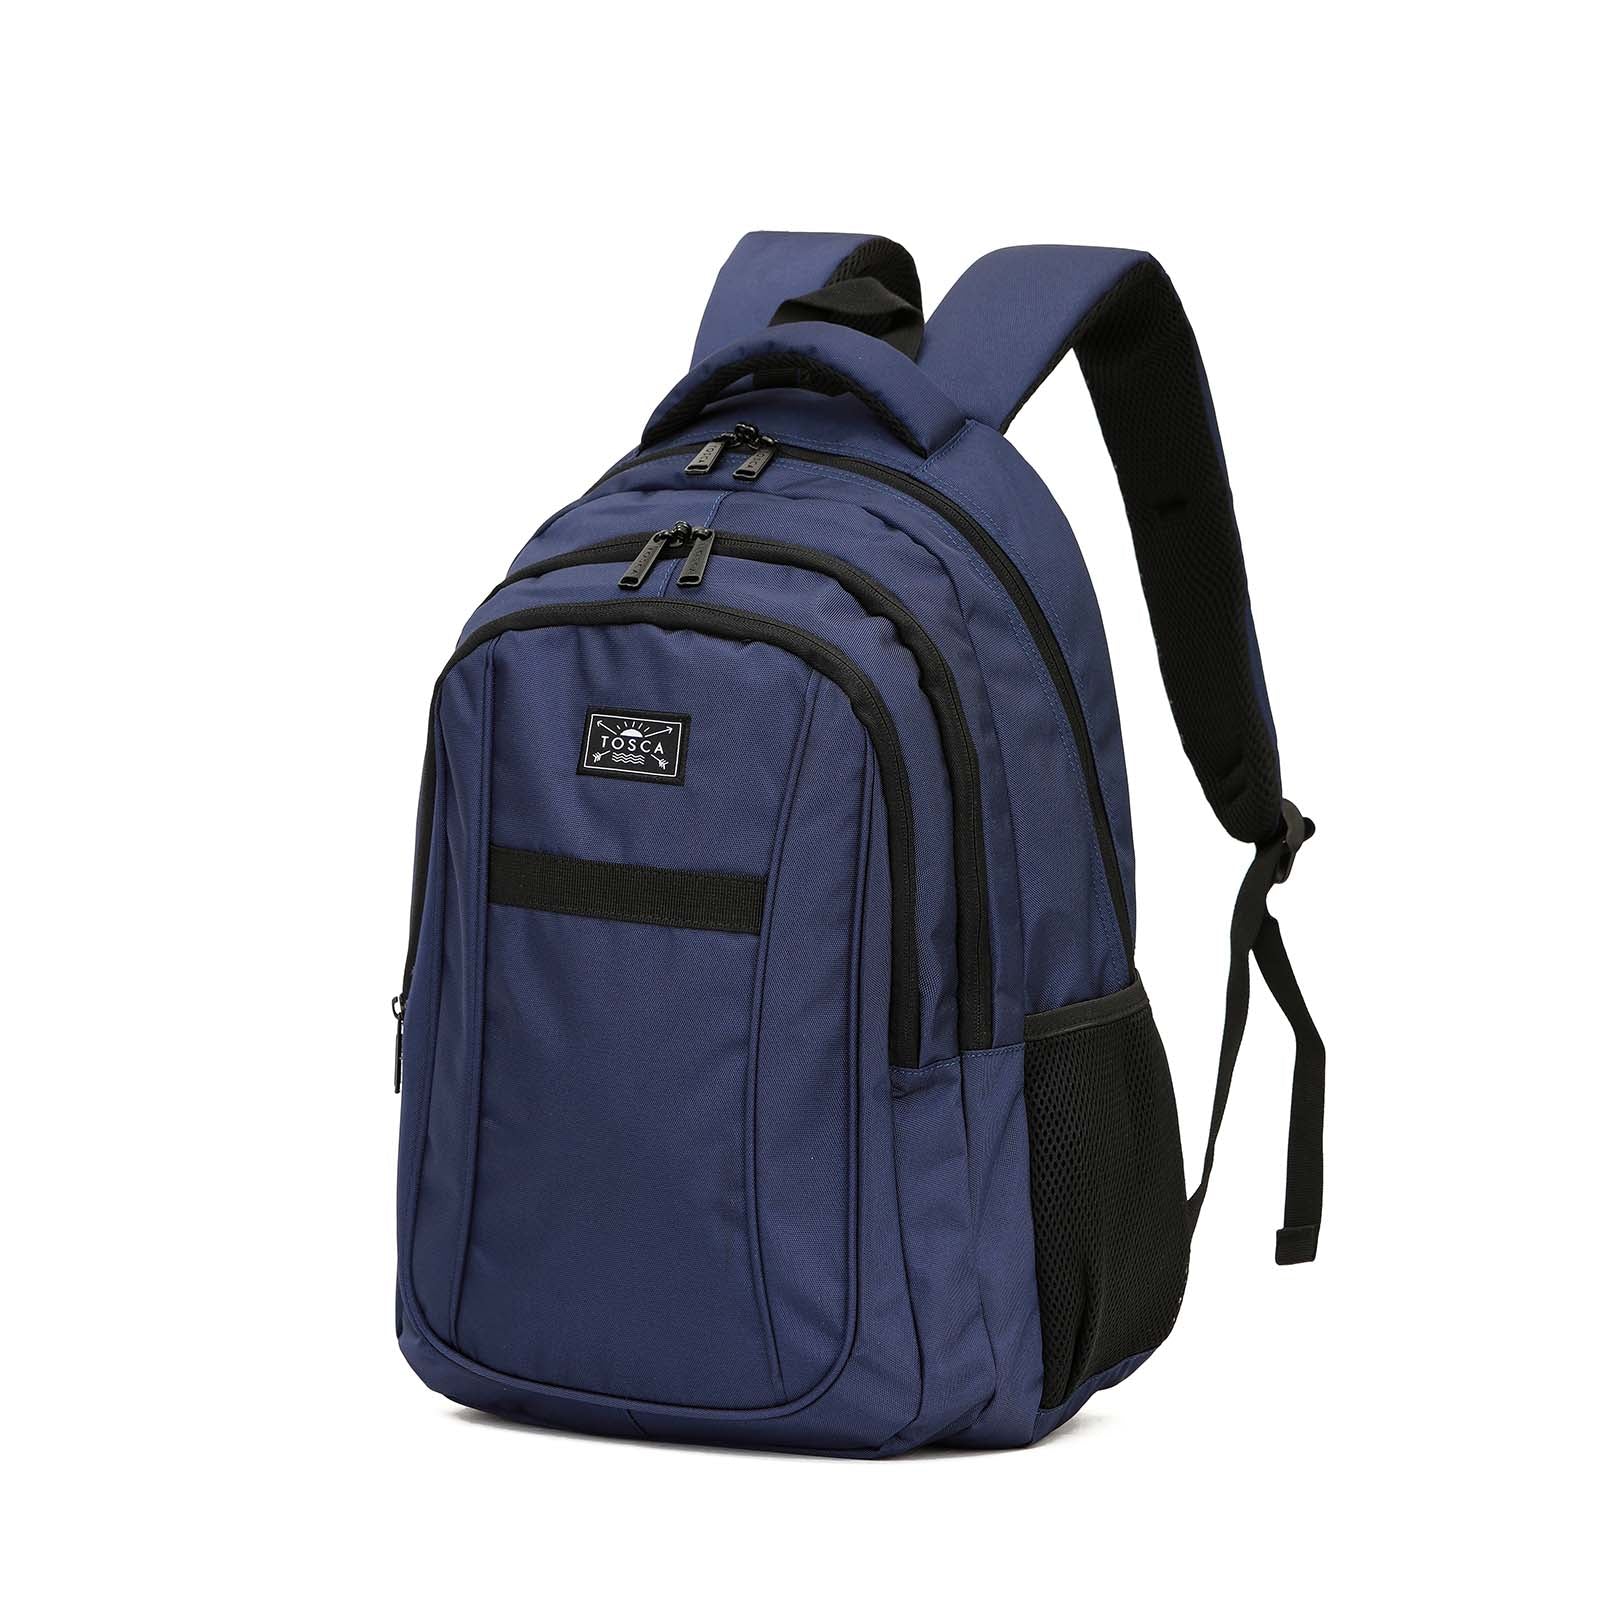 tosca-multi-compartment-laptop-backpack-35l-navy-front-angle